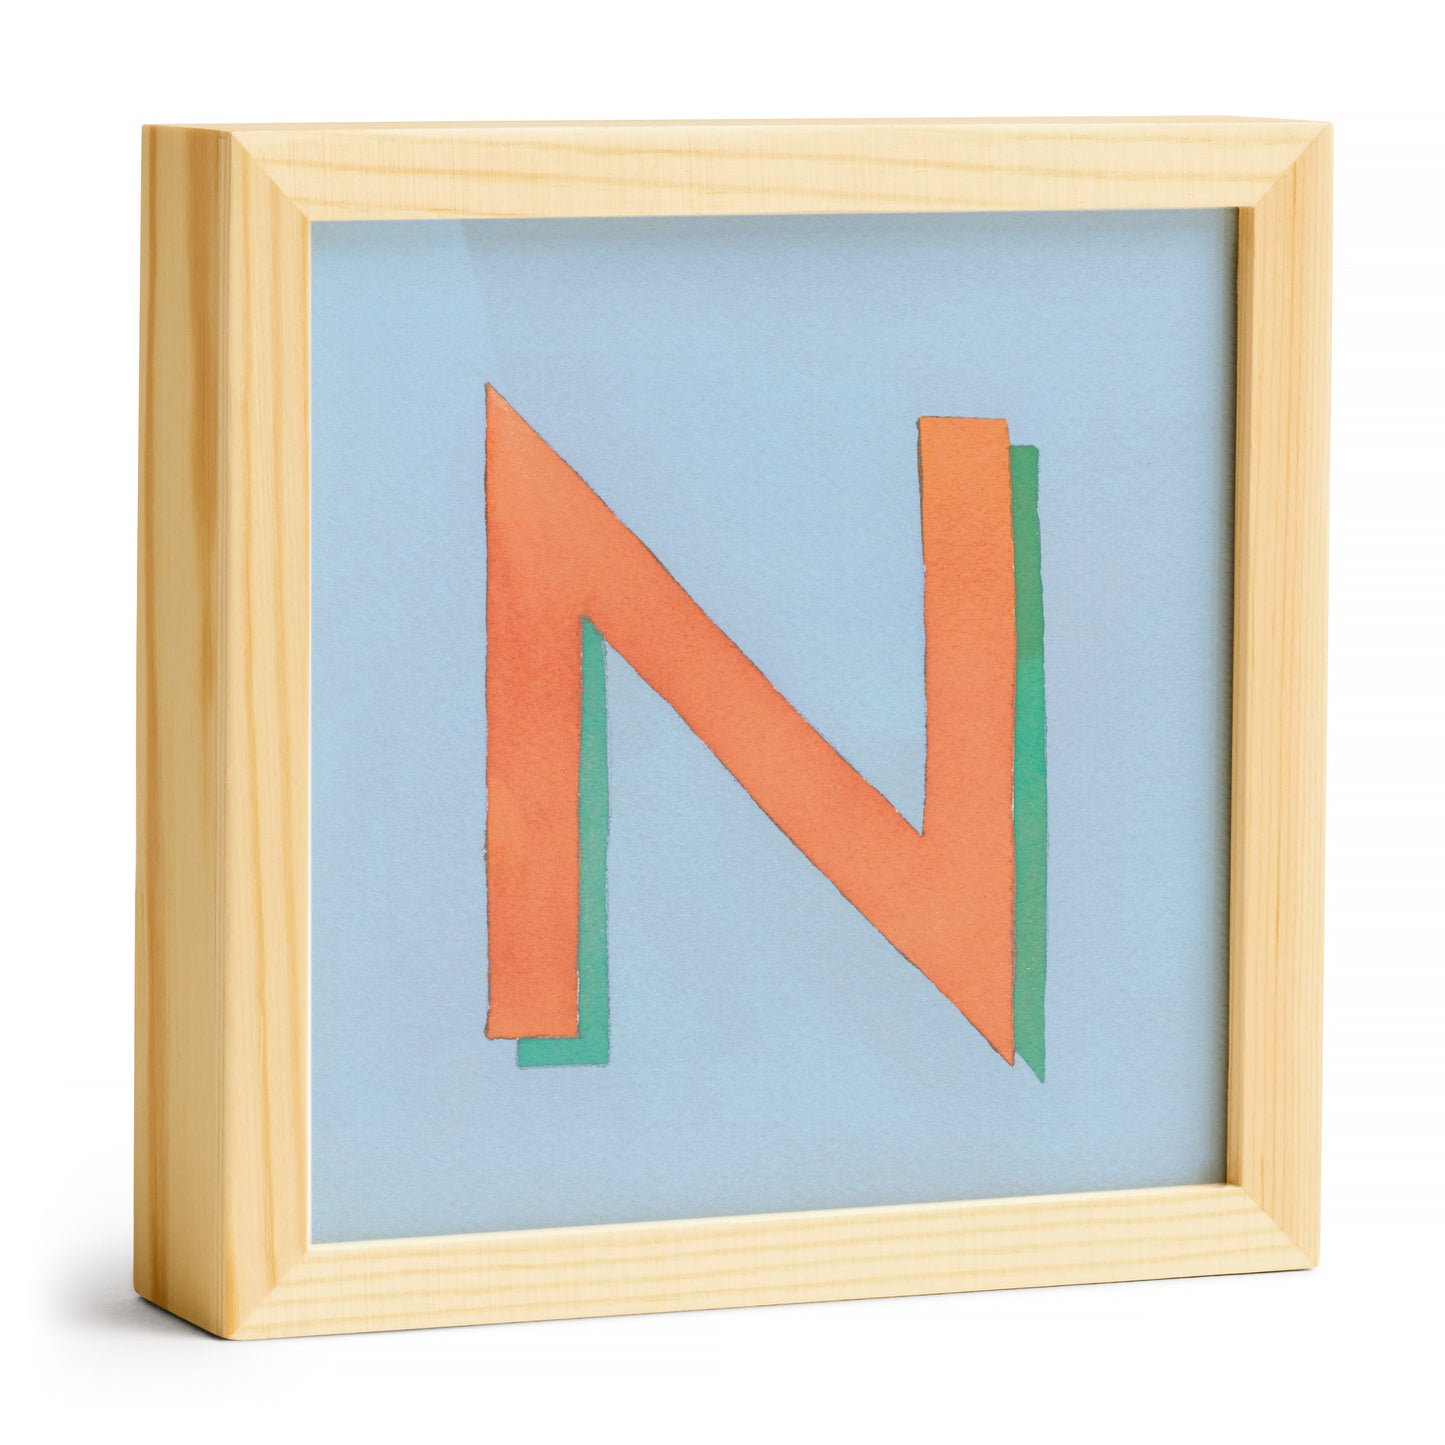 N is for... Little Print